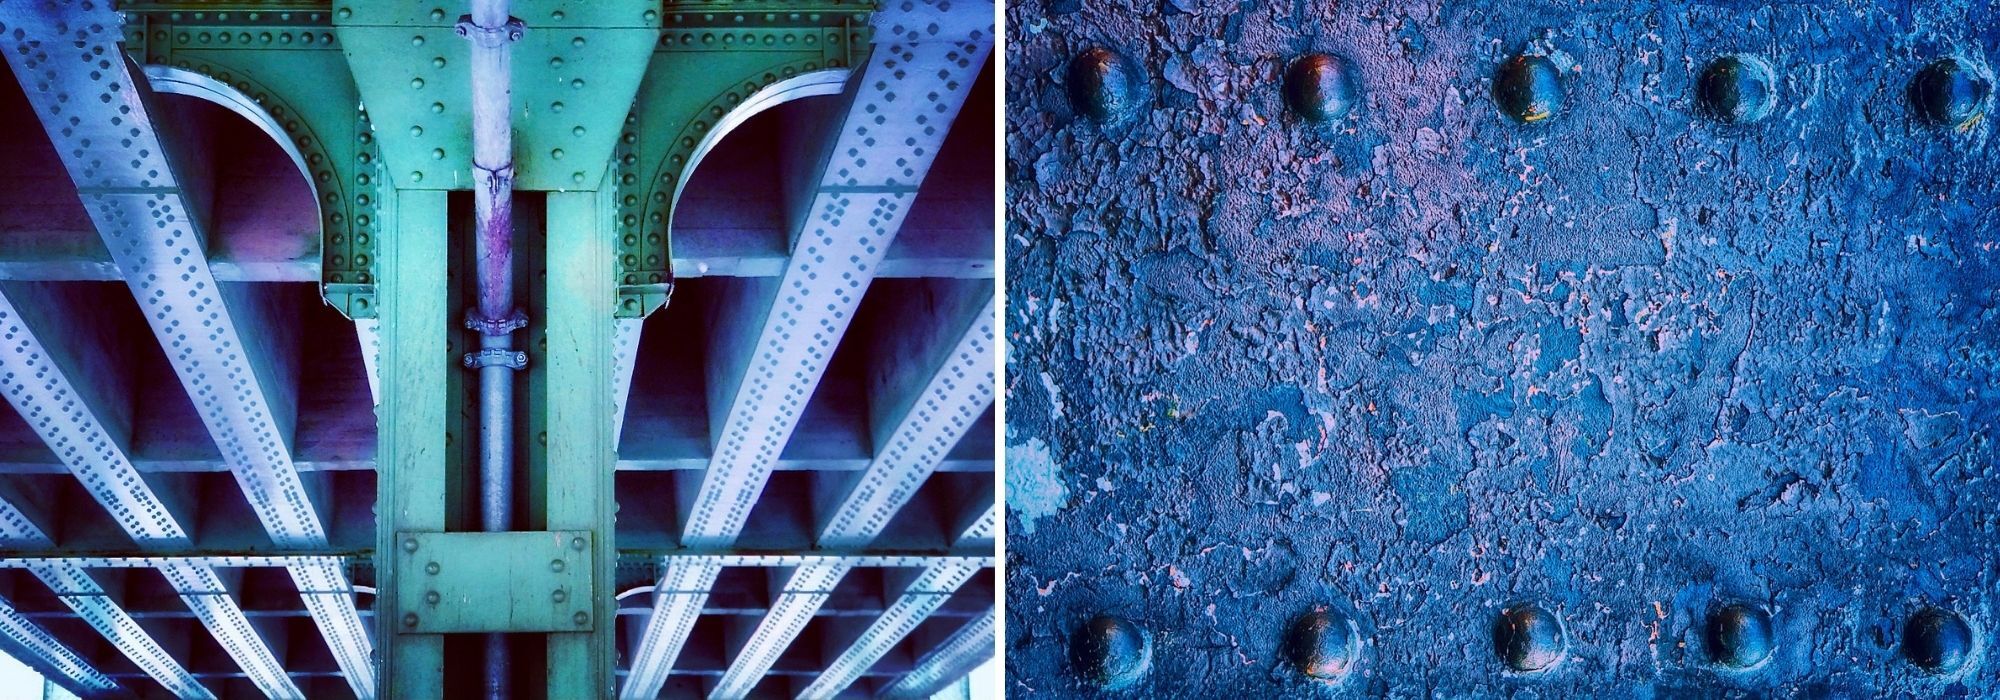 The underside of two bridges, with blue, purple, and teal greens visible. 